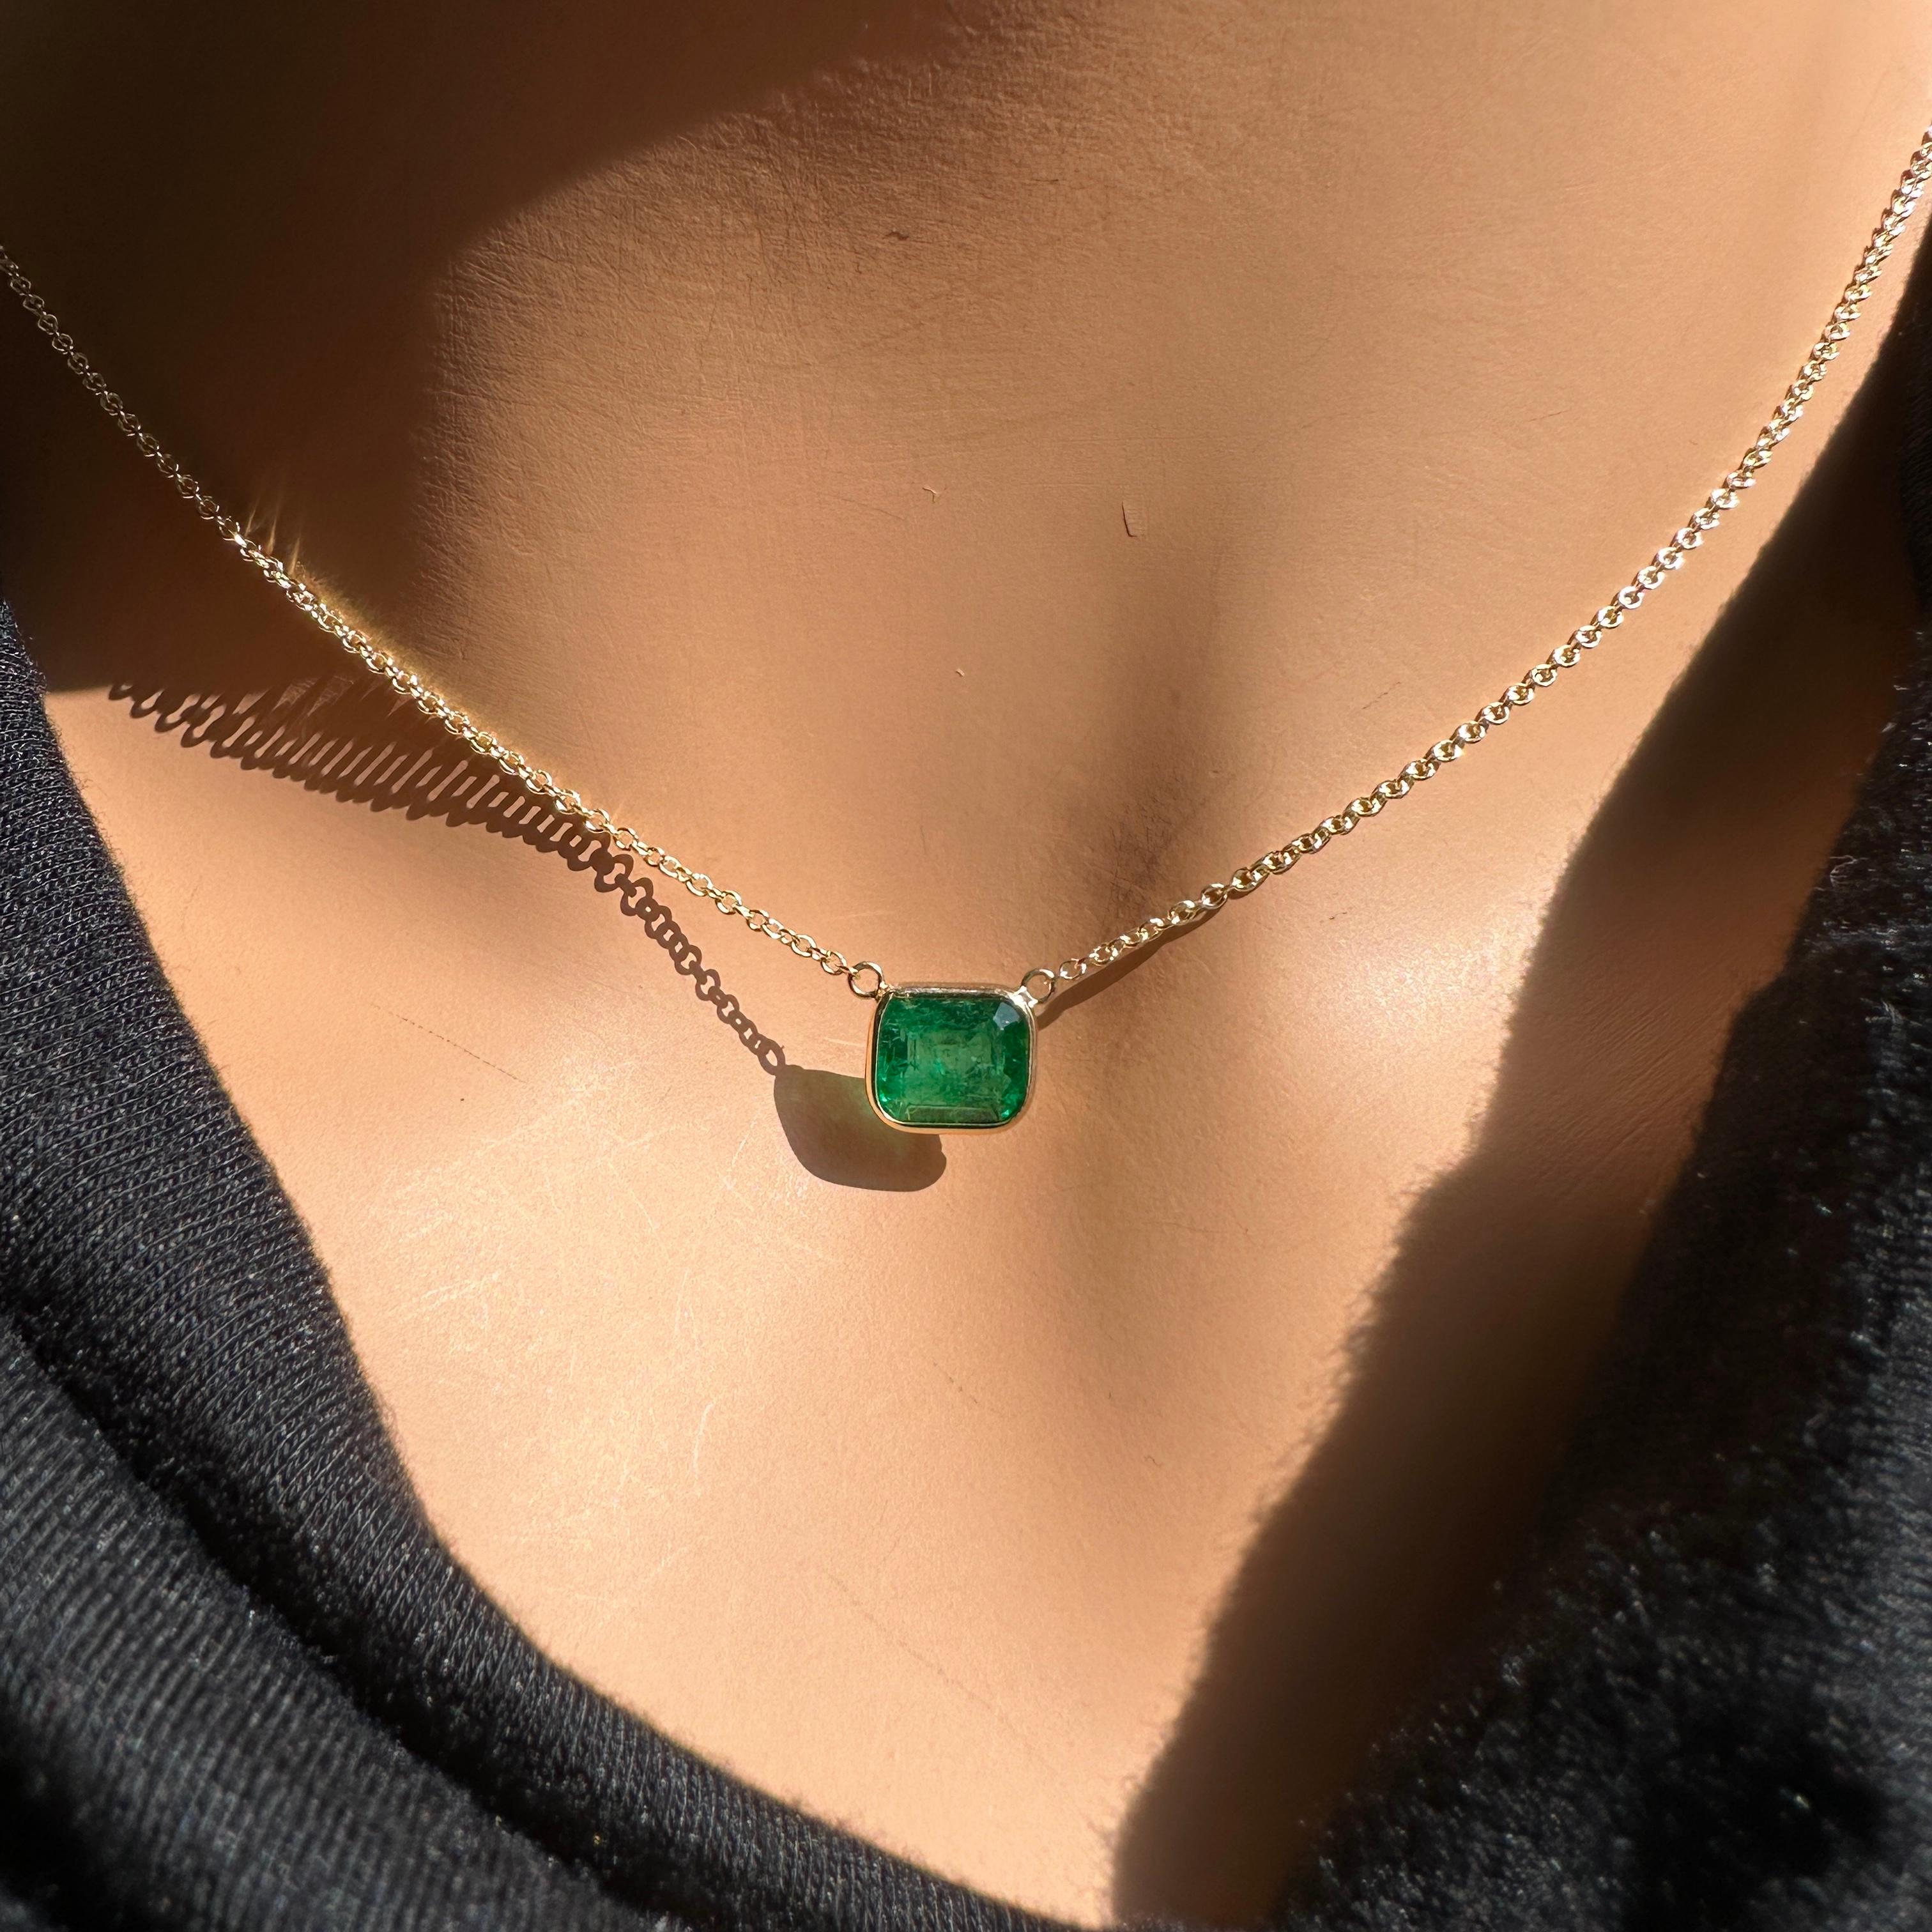 A fashion necklace made of 14k yellow gold with a main stone of an emerald-cut emerald weighing 1.88 carats would be a stunning and elegant choice. Emeralds are known for their rich green color and captivating beauty, and the emerald cut is a